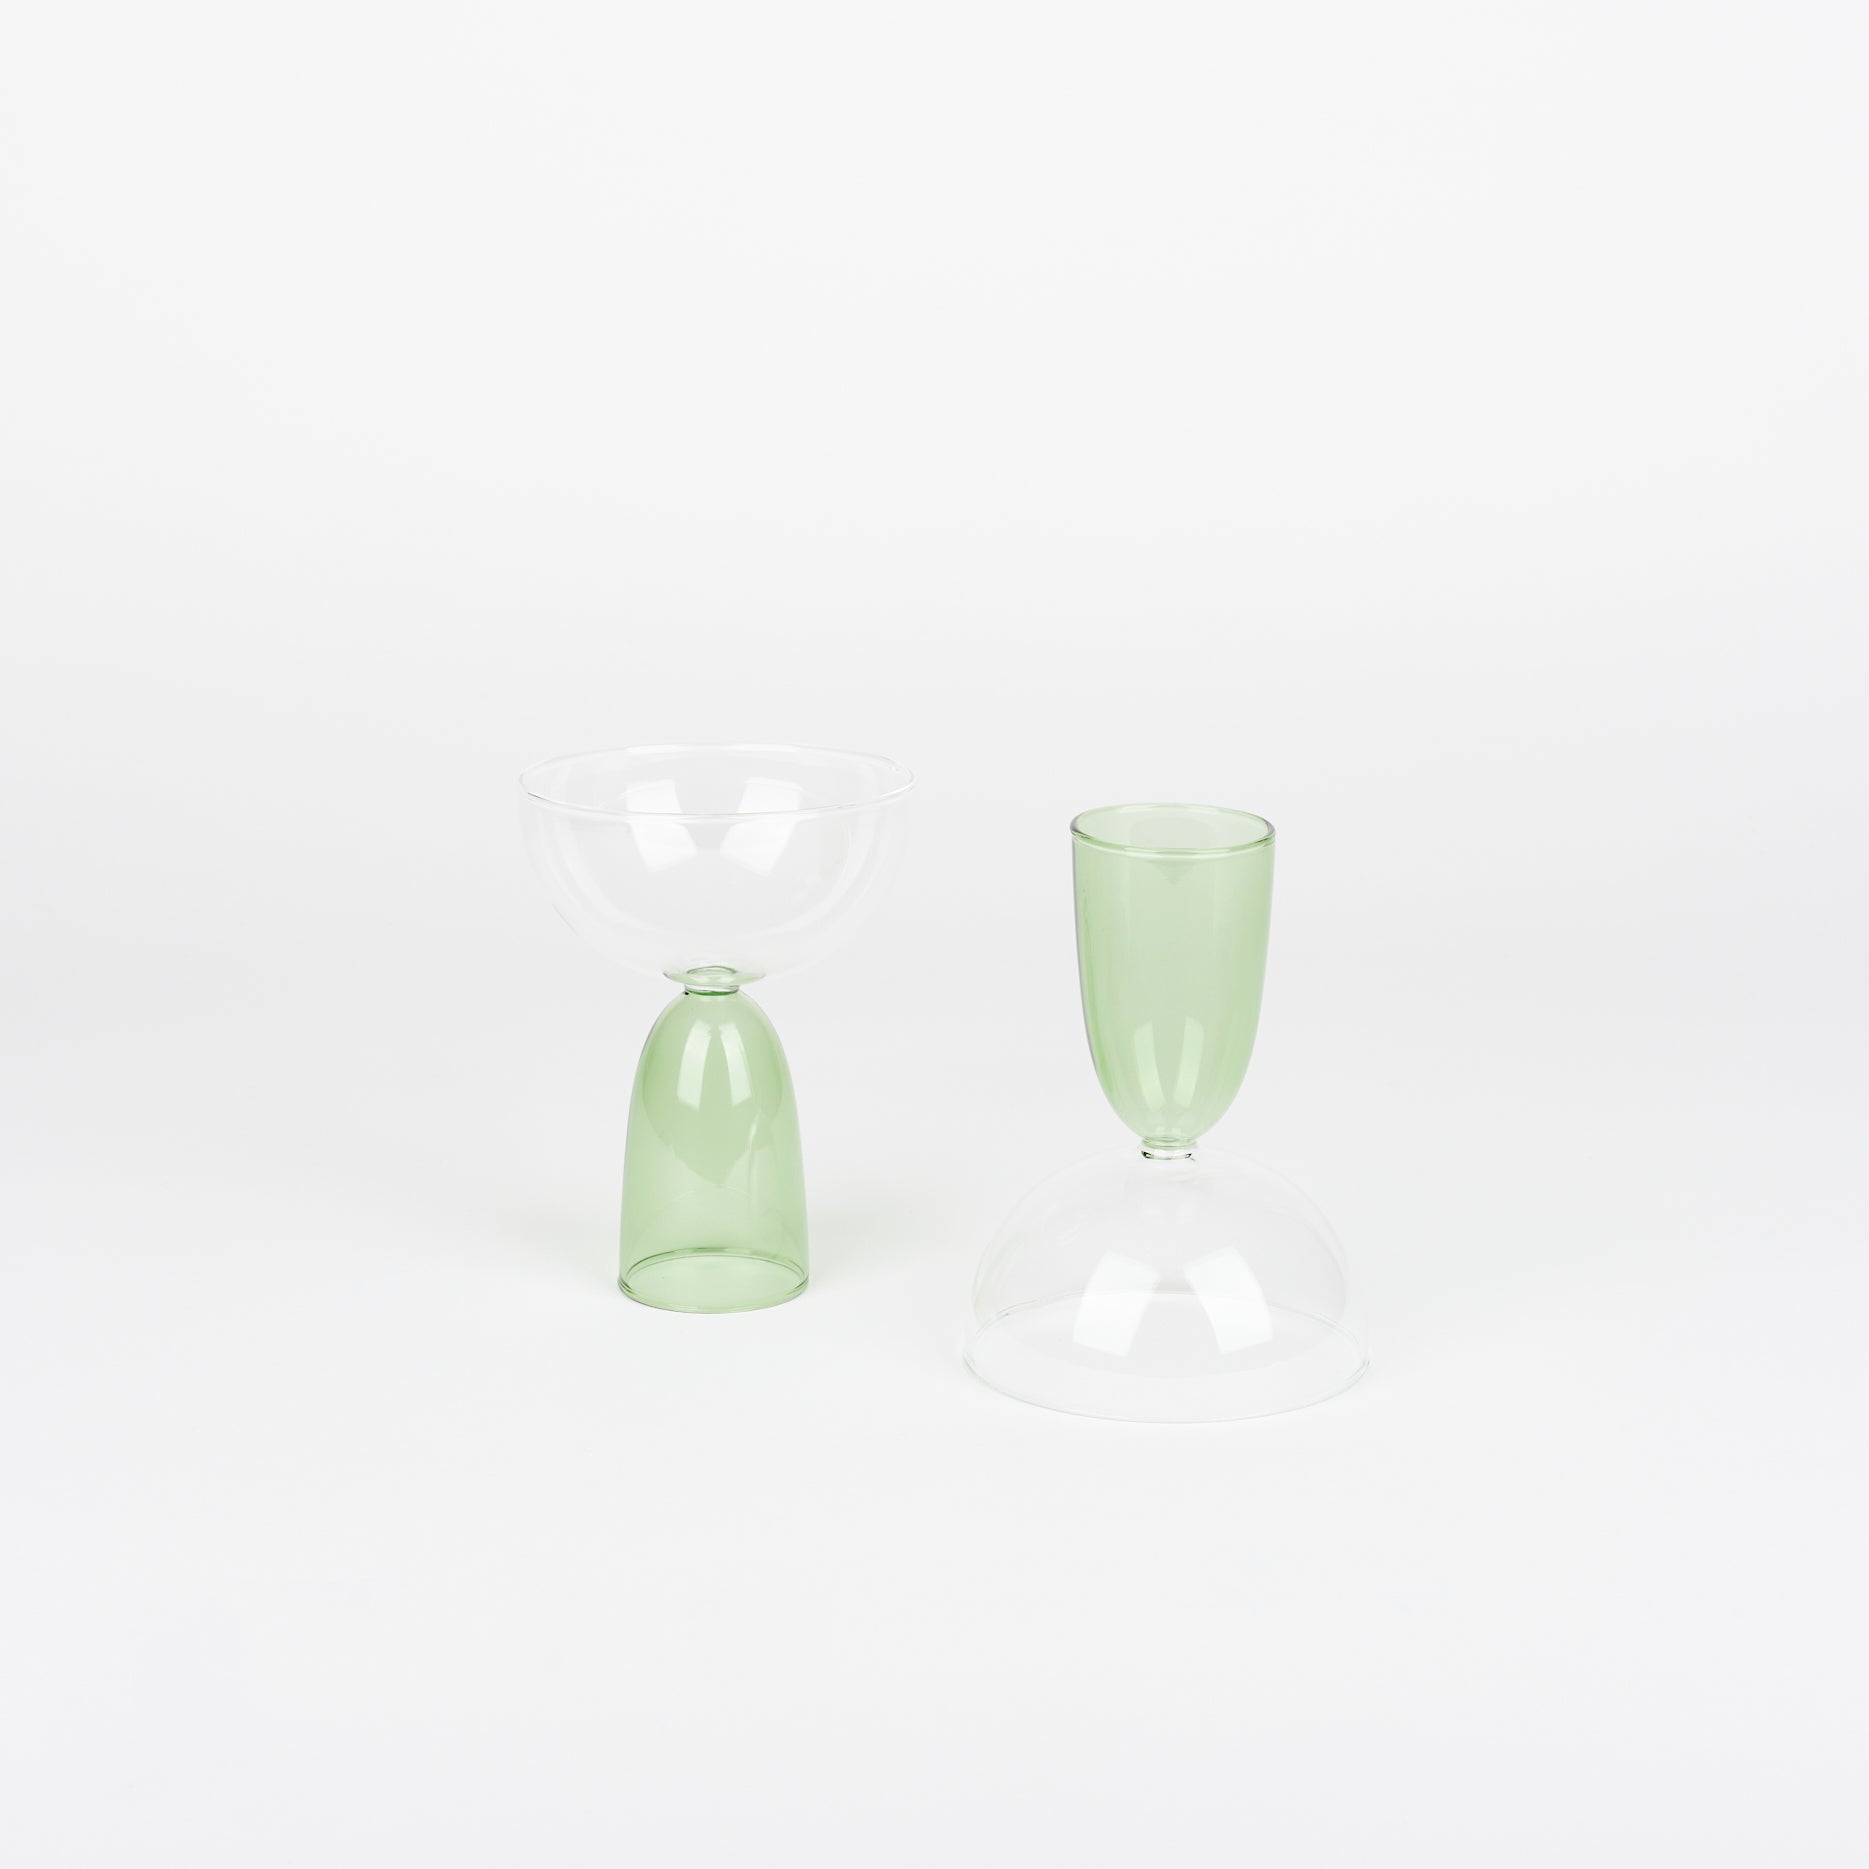 pair of Mamo coupe glasses with green bases and one is turned upside down